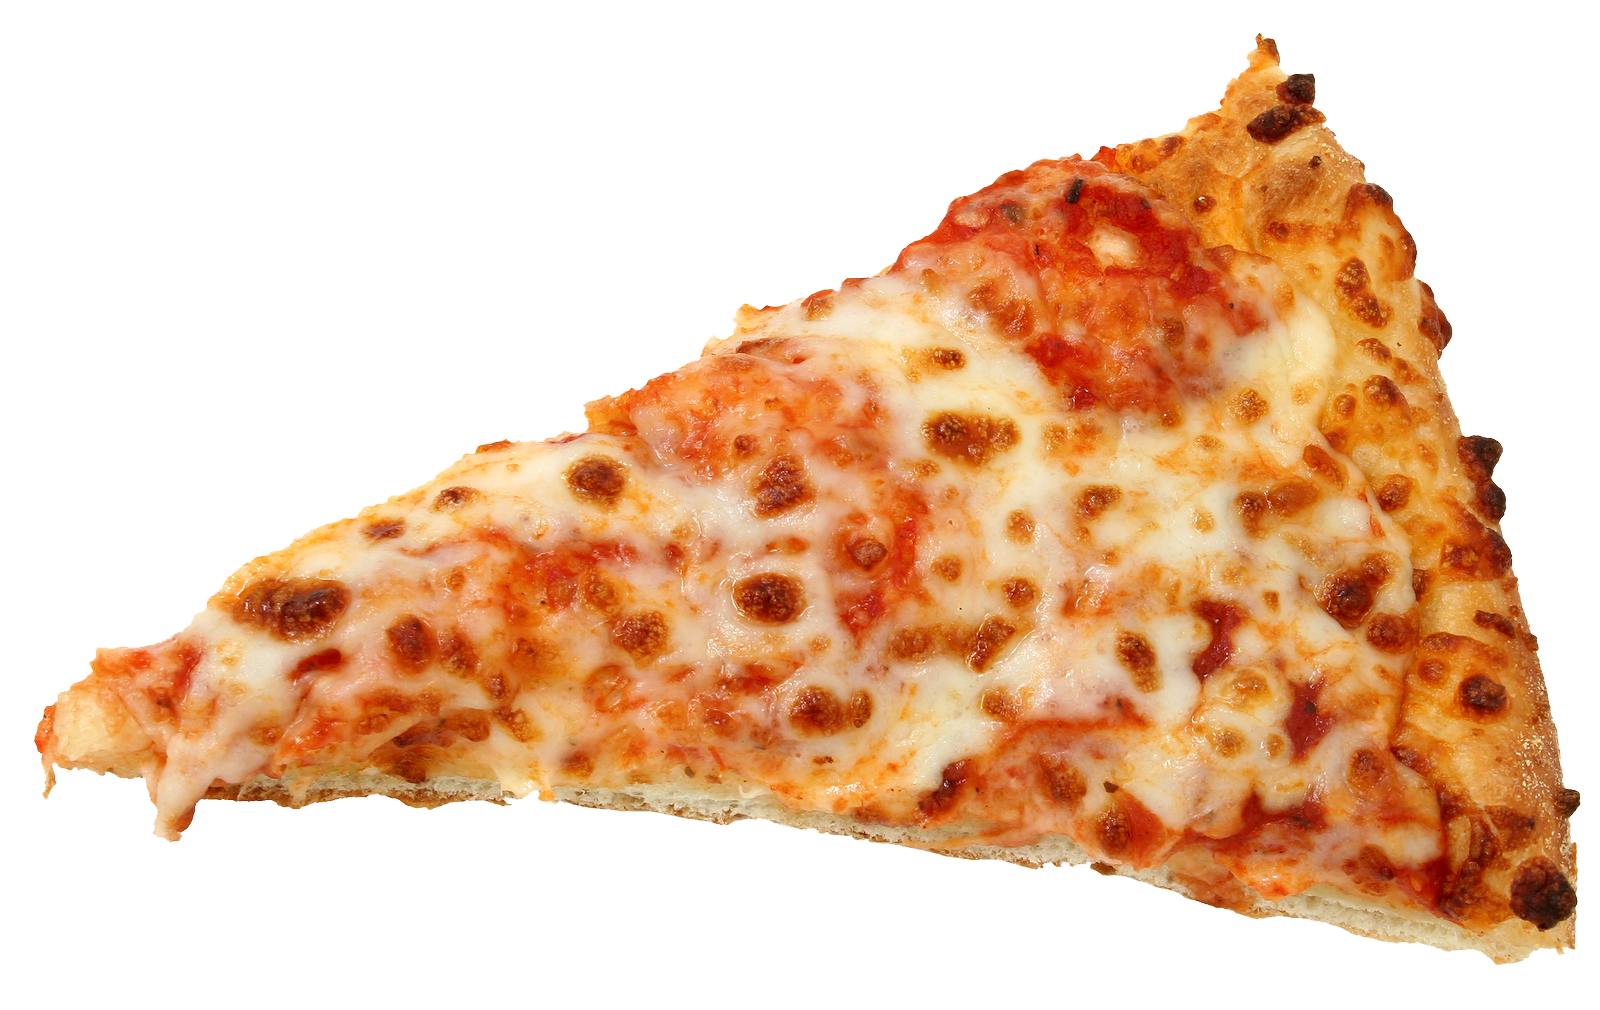 Cheese pizza clipart free download clip art on